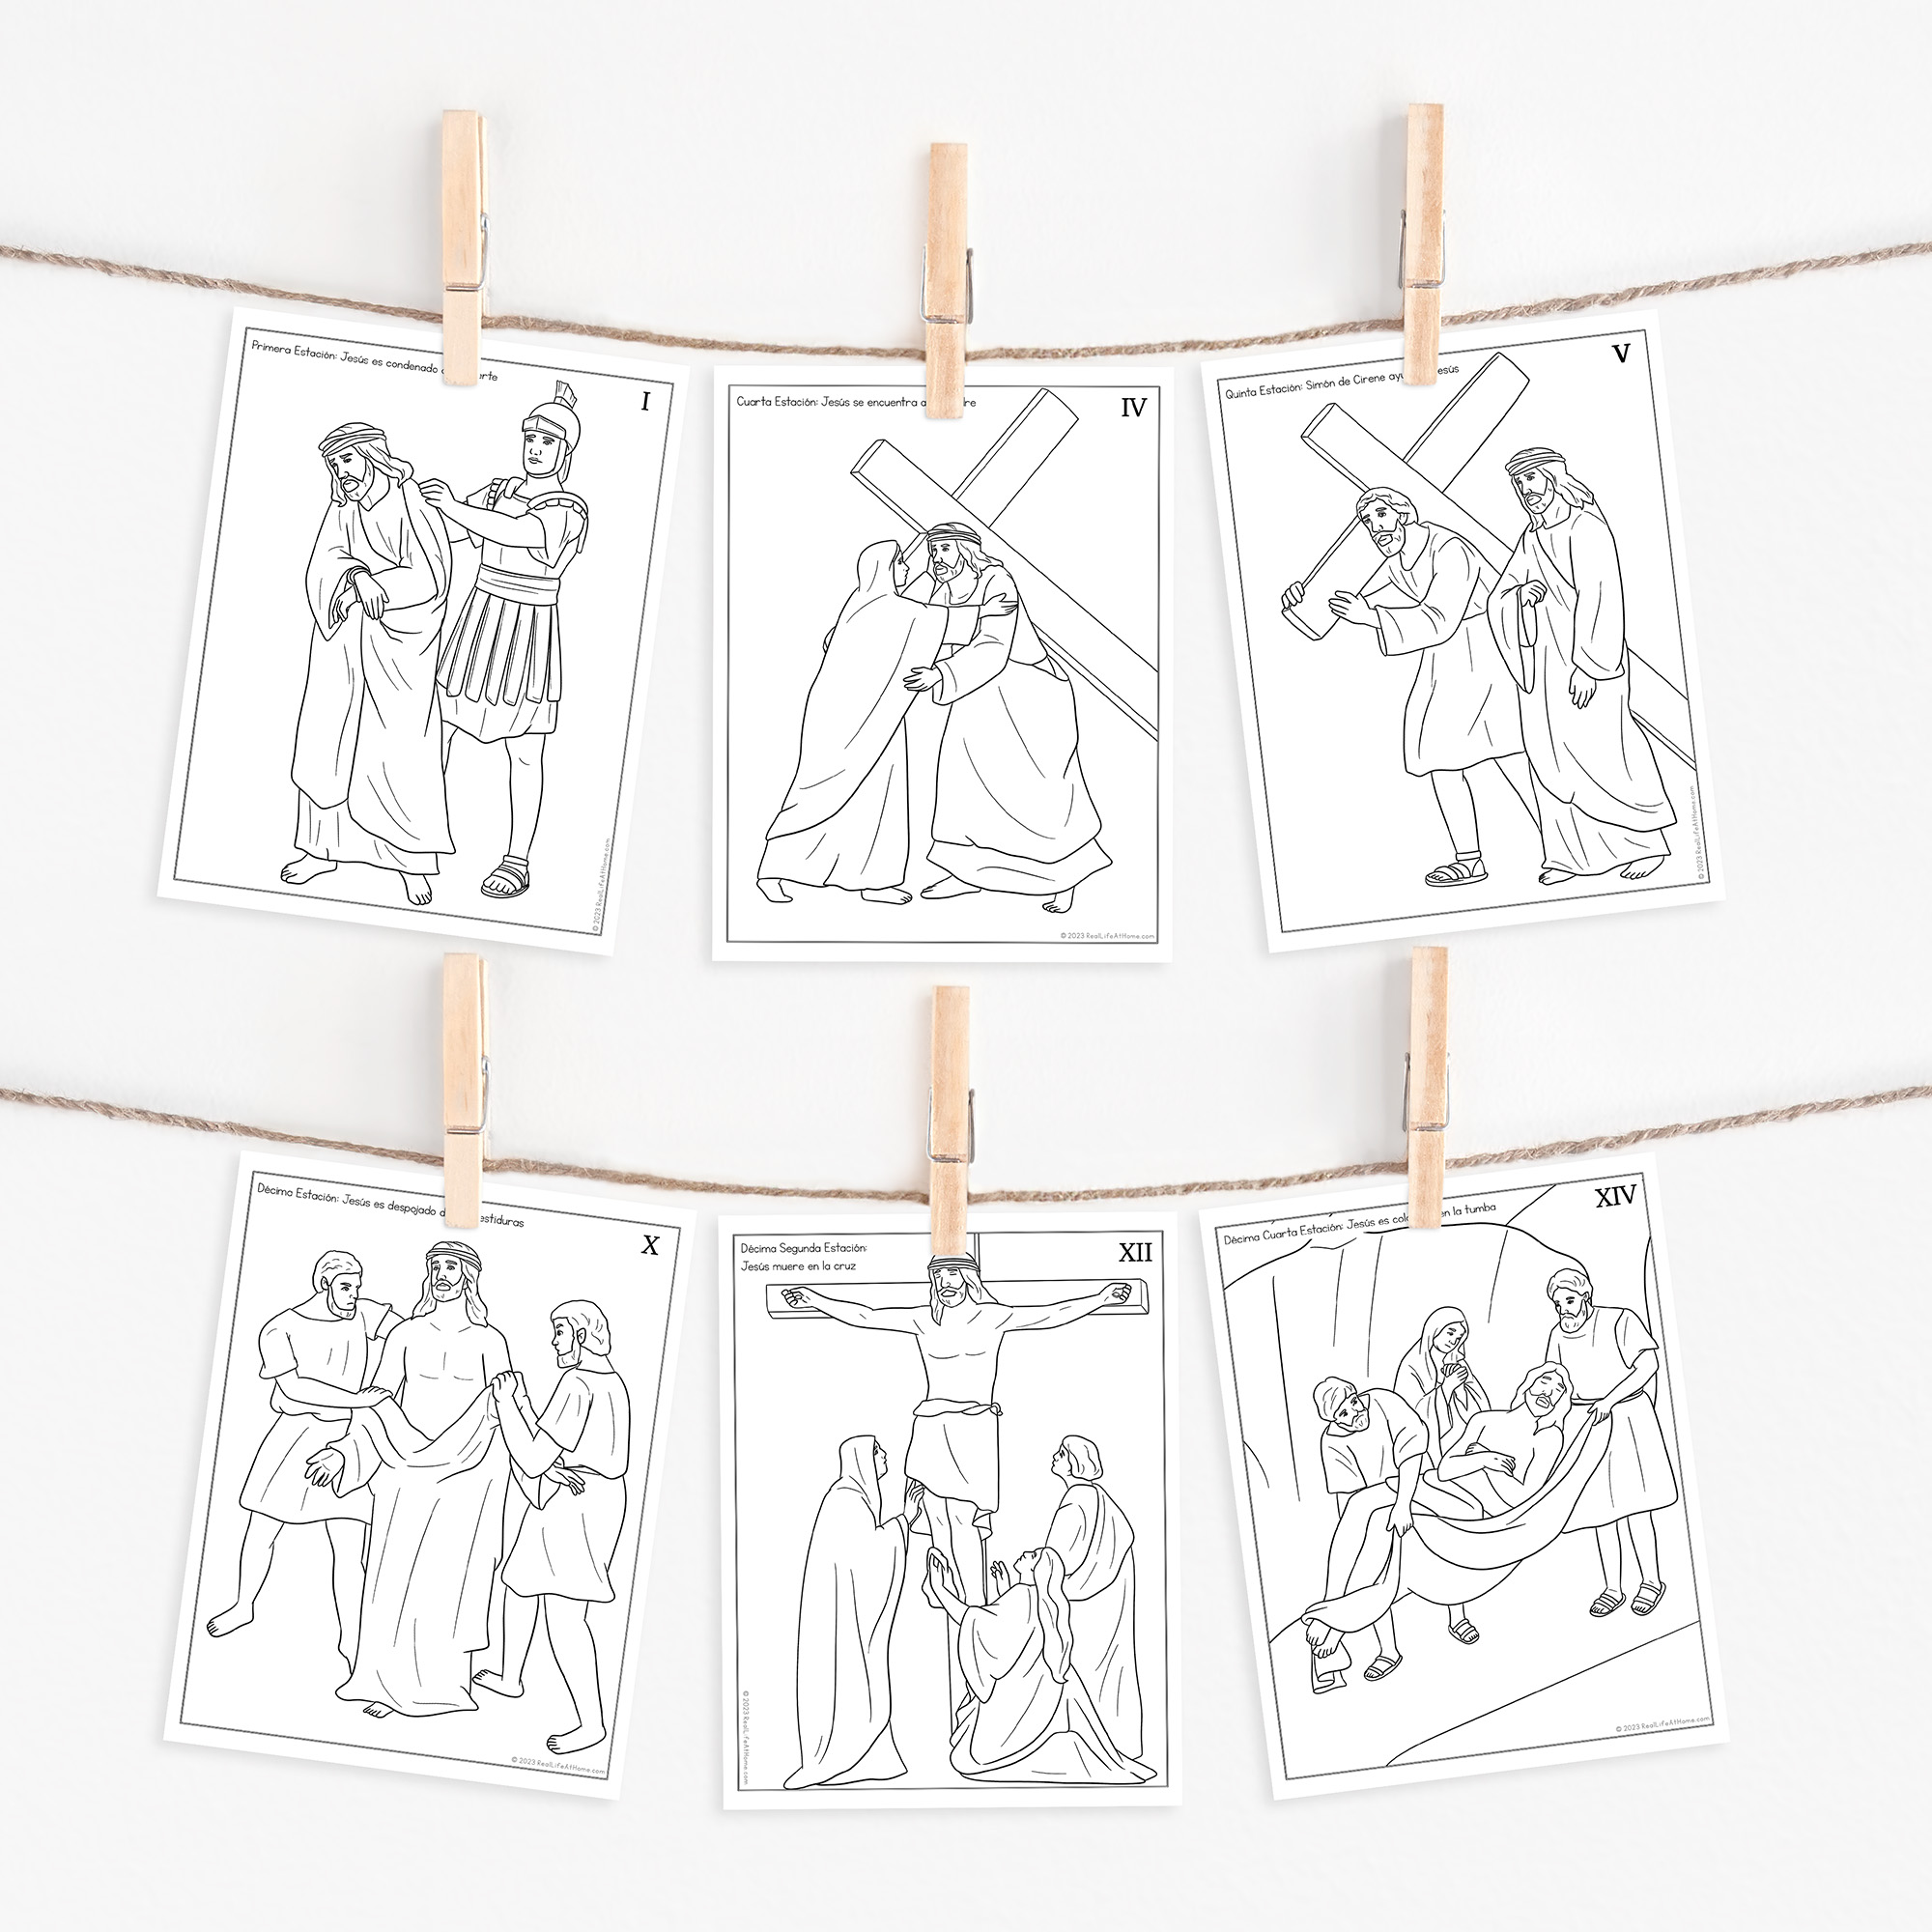 Stations of the Cross Coloring Pages in Spanish on a Clothesline